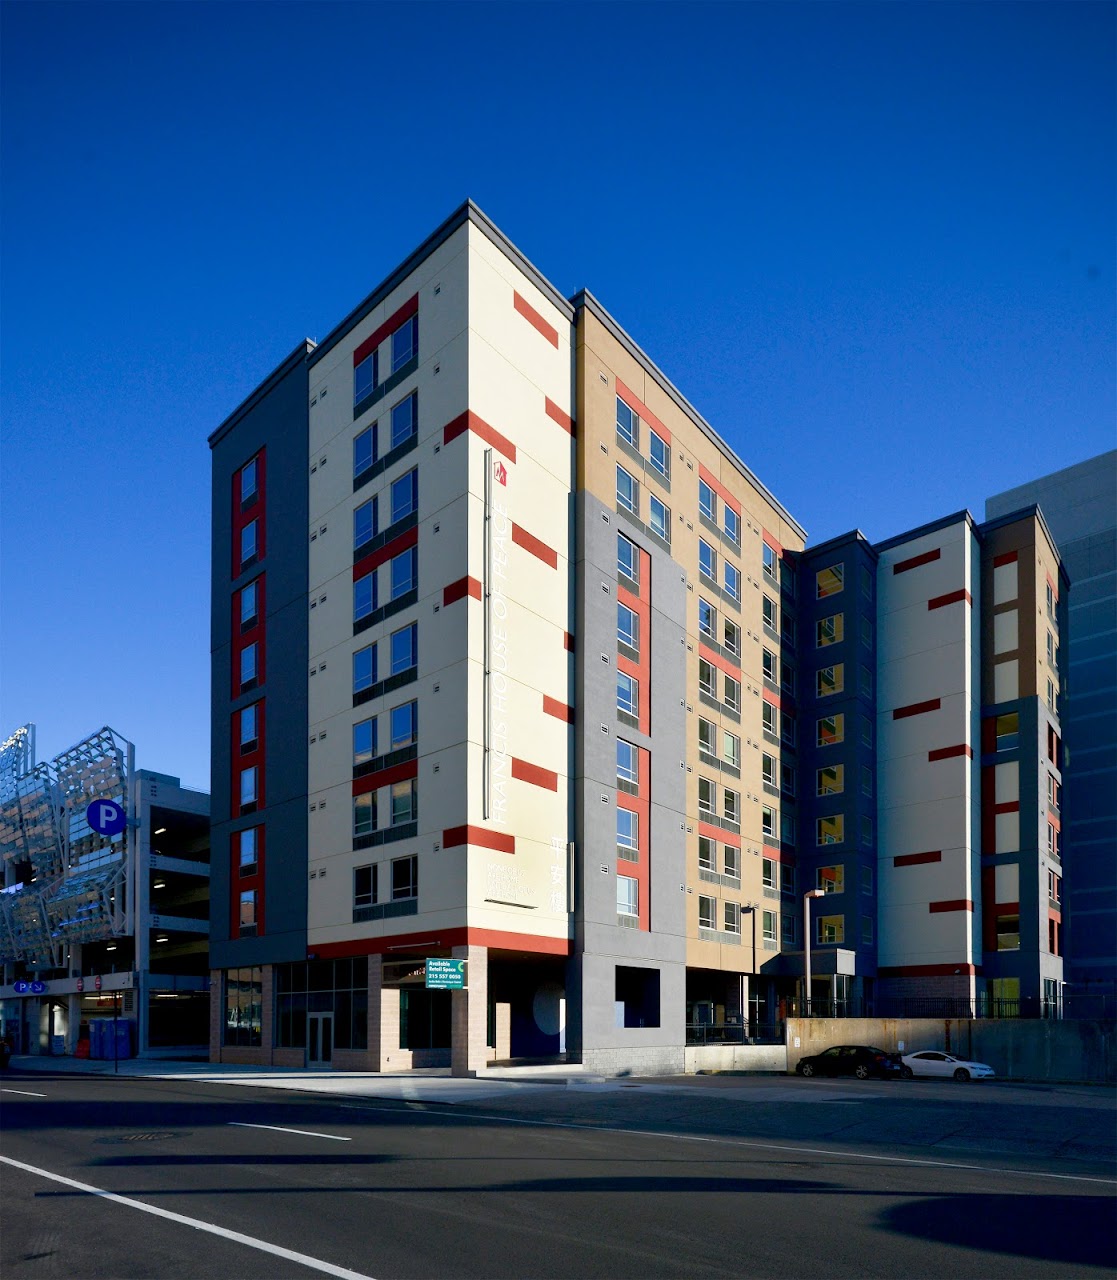 Photo of 810 ARCH STREET. Affordable housing located at 810 ARCH ST PHILADELPHIA, PA 19107